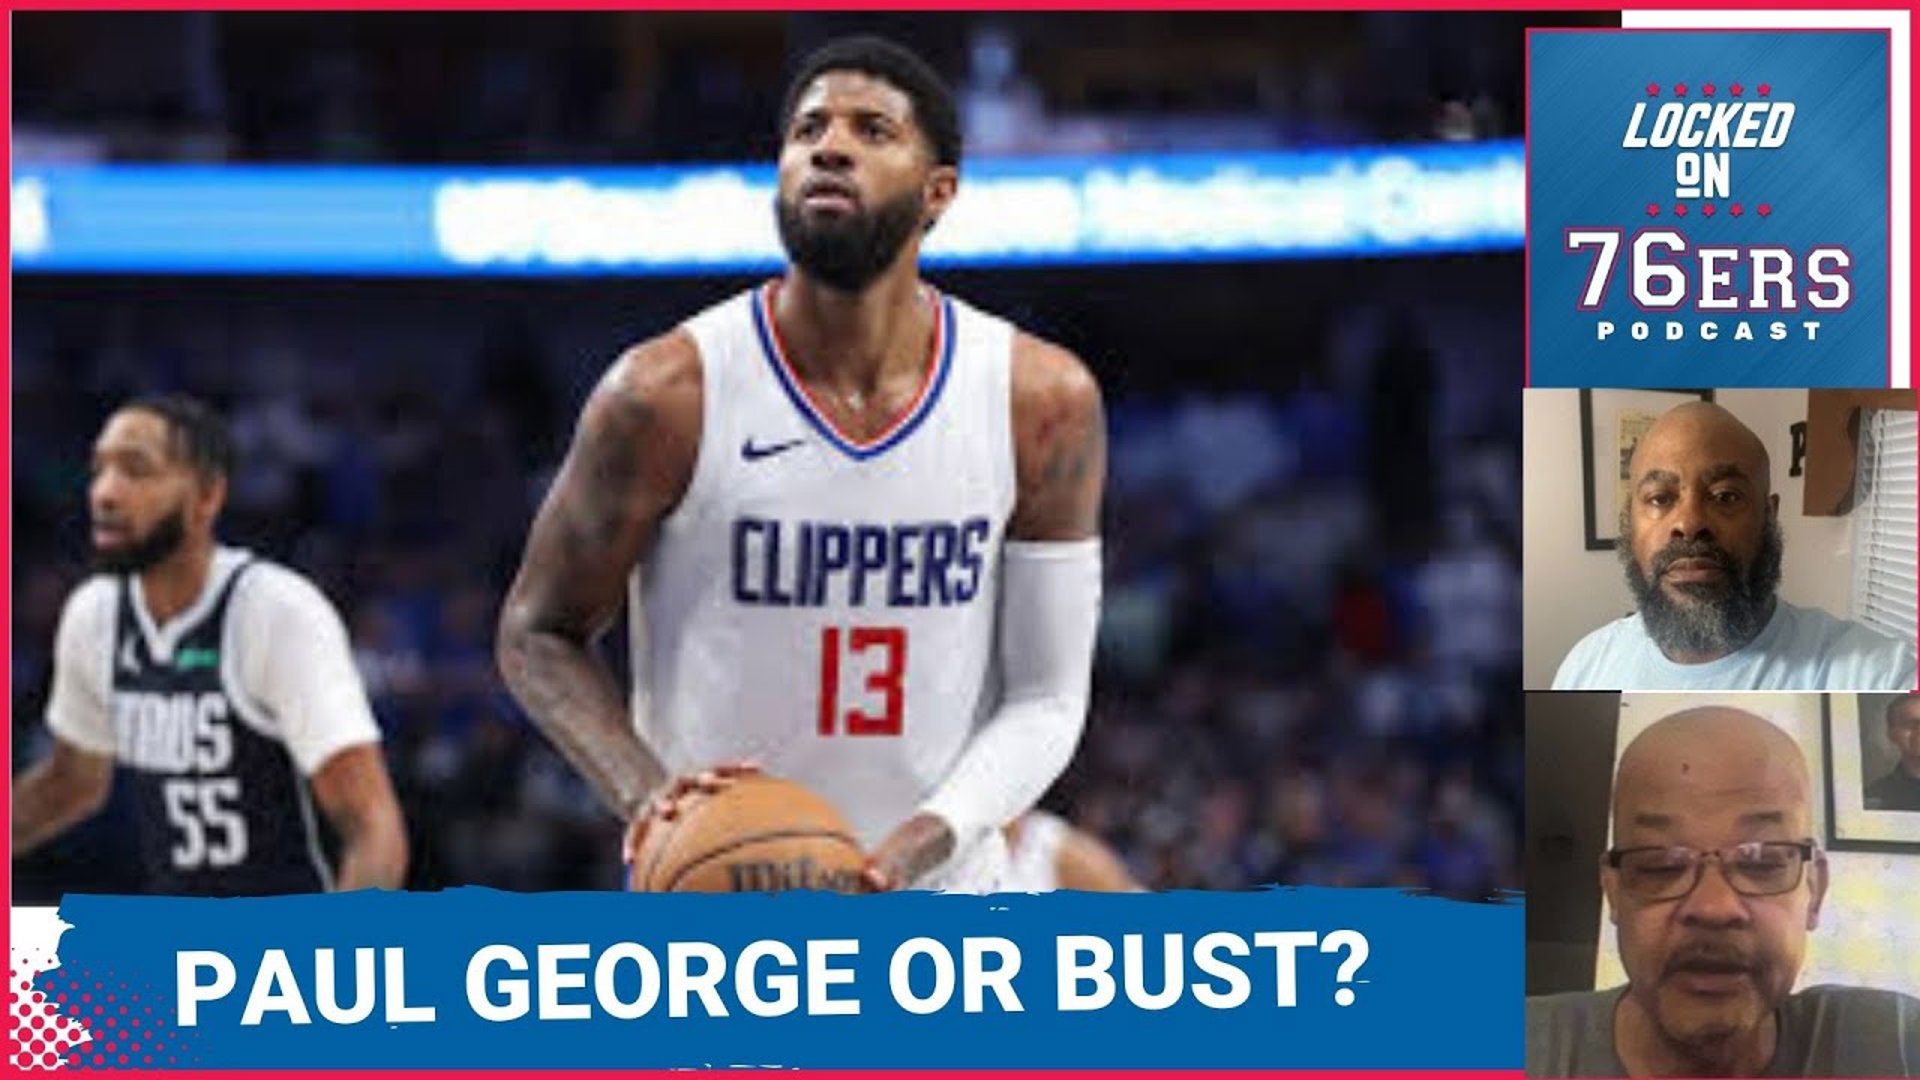 Is it Paul George or bust for the Sixers? Would DeMar DeRozan be a good fallback option?